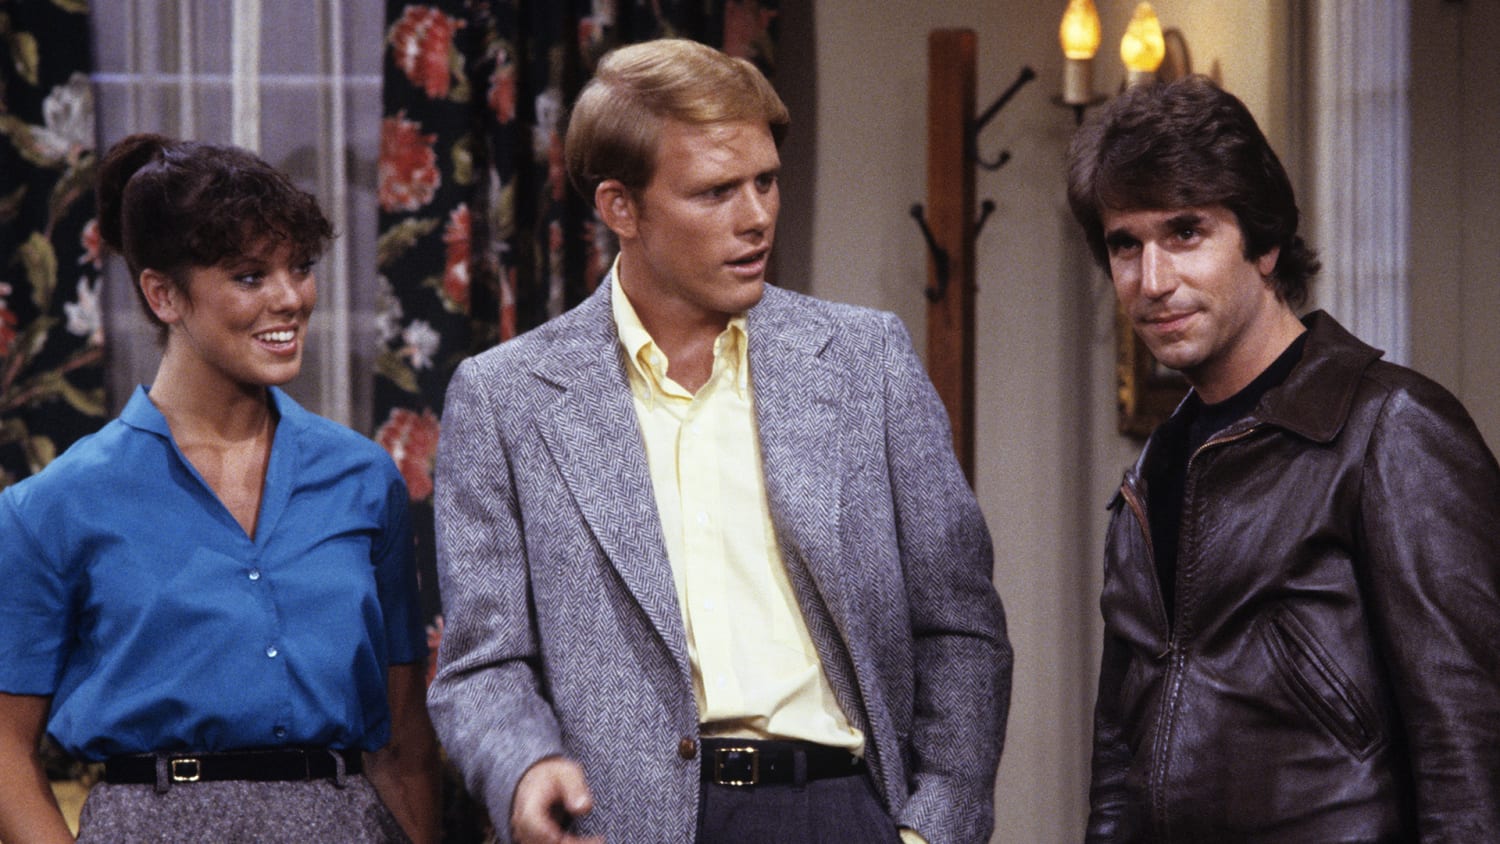 Erin Moran's 'Happy Days' co-stars react to news of her death - TODAY.com